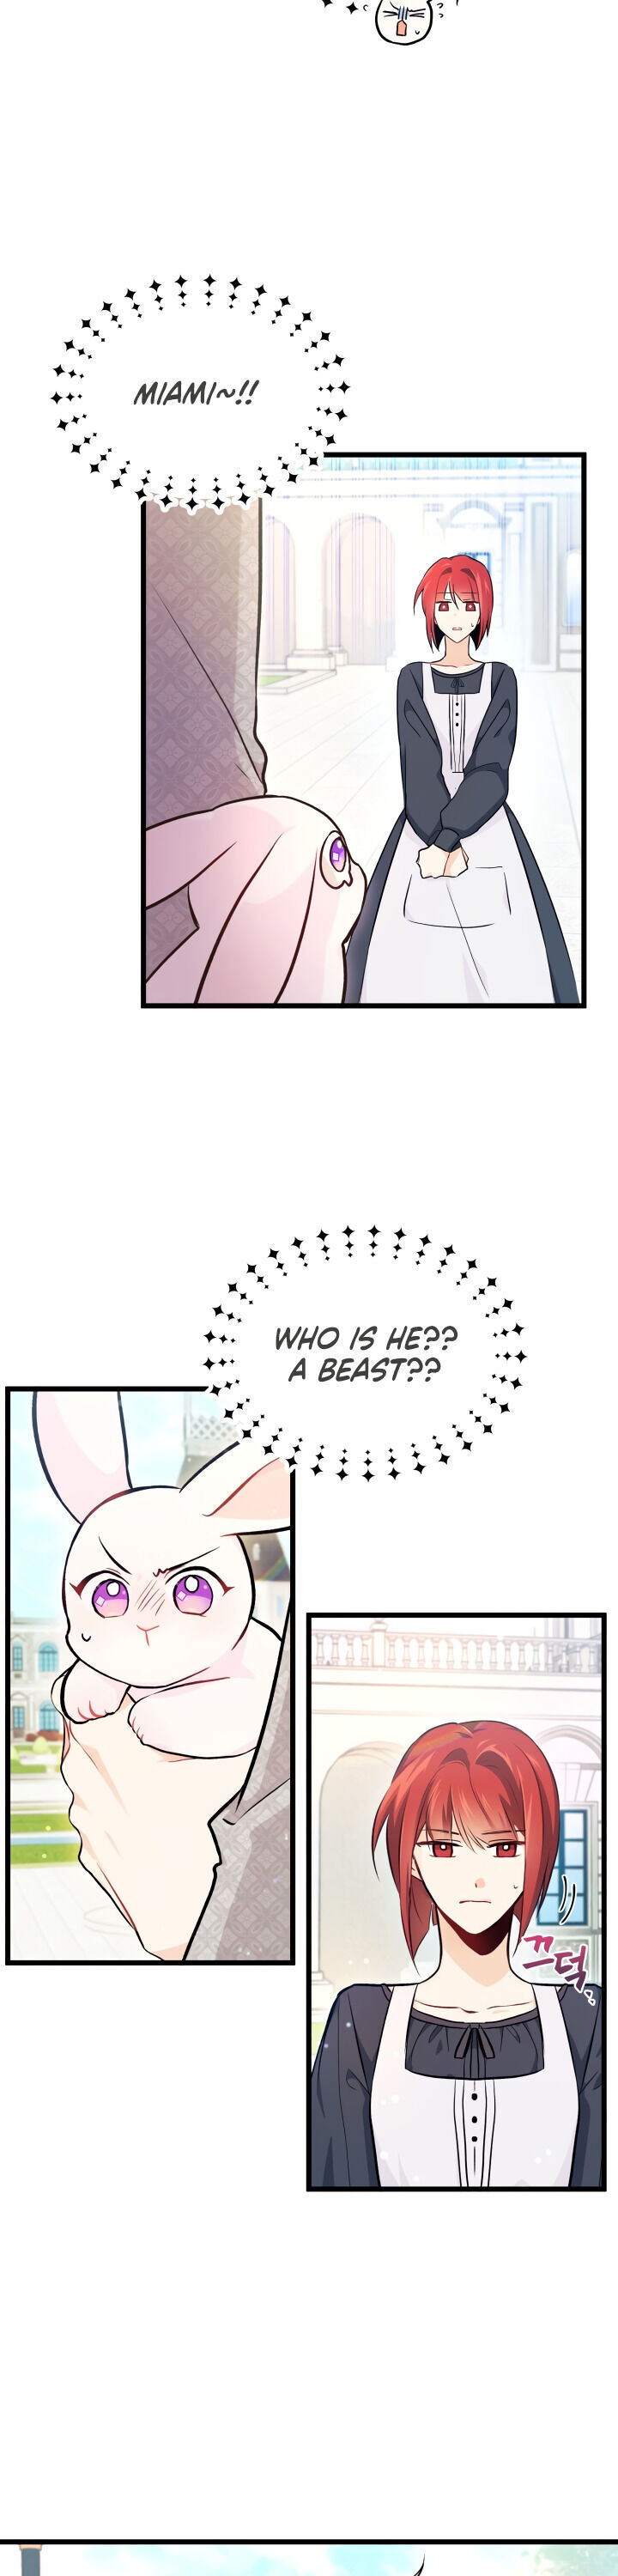 The Symbiotic Relationship Between A Rabbit and A Black Panther - Chapter 8 Page 22